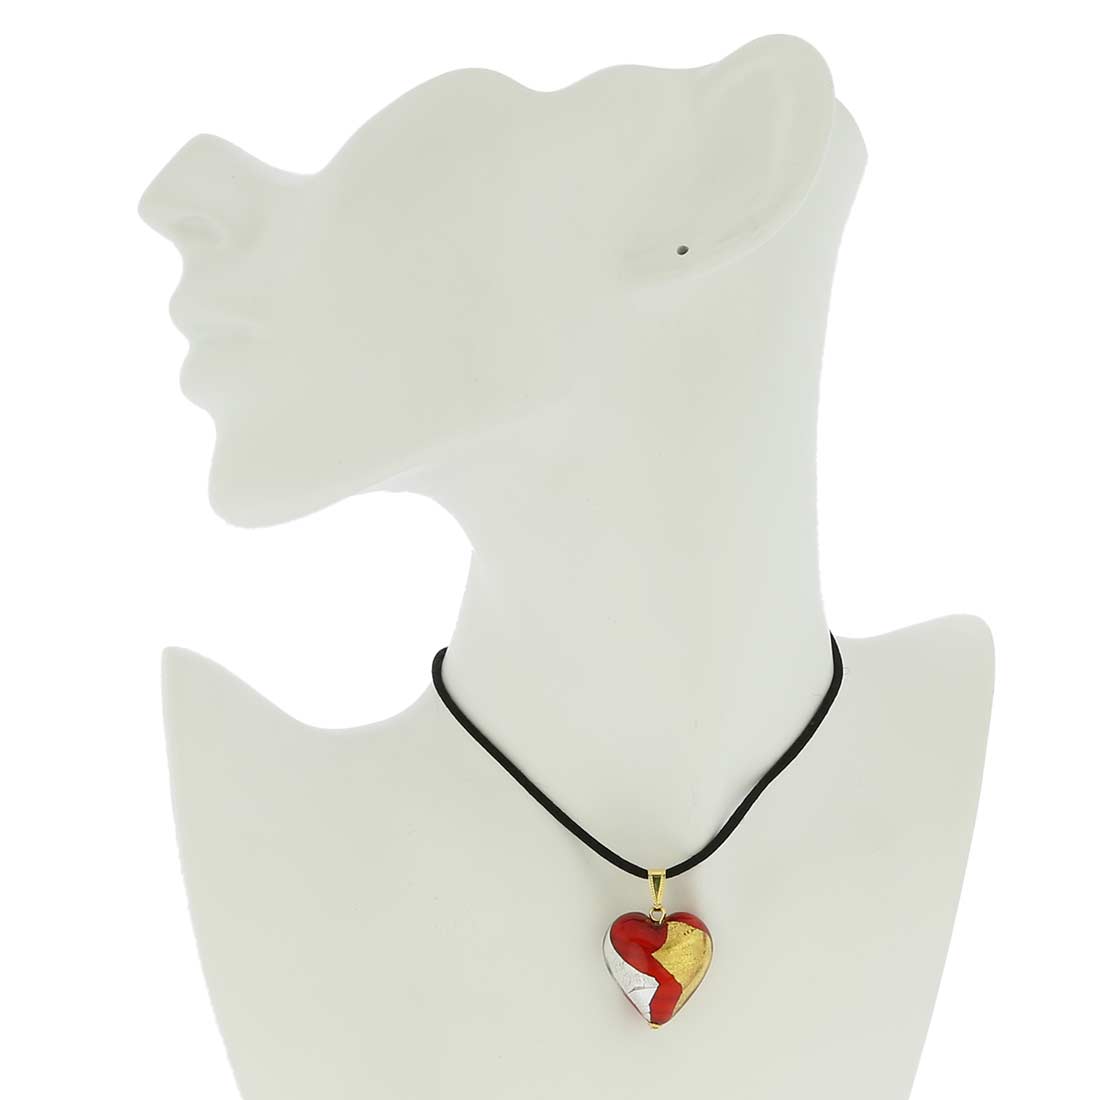 Murano Heart Pendant - Red Gold and Silver